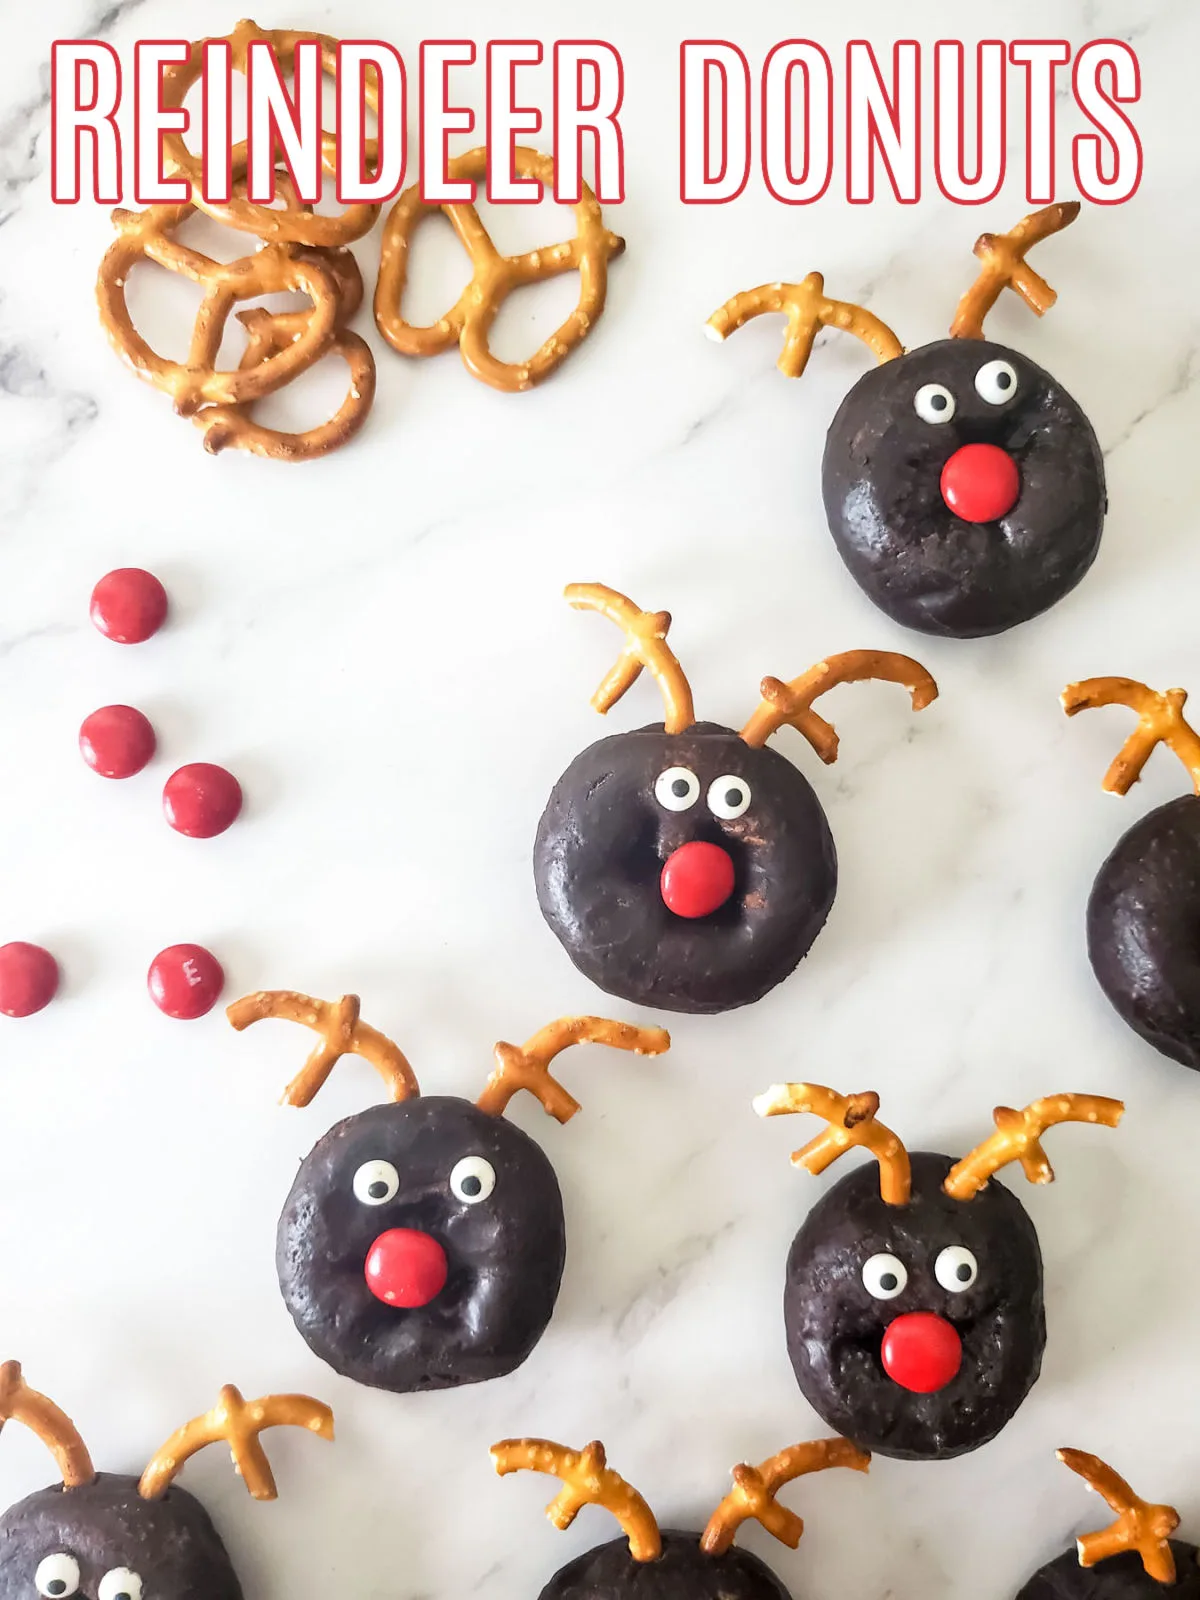 Store bought chocolate donuts decorated to look like  reindeer donuts.